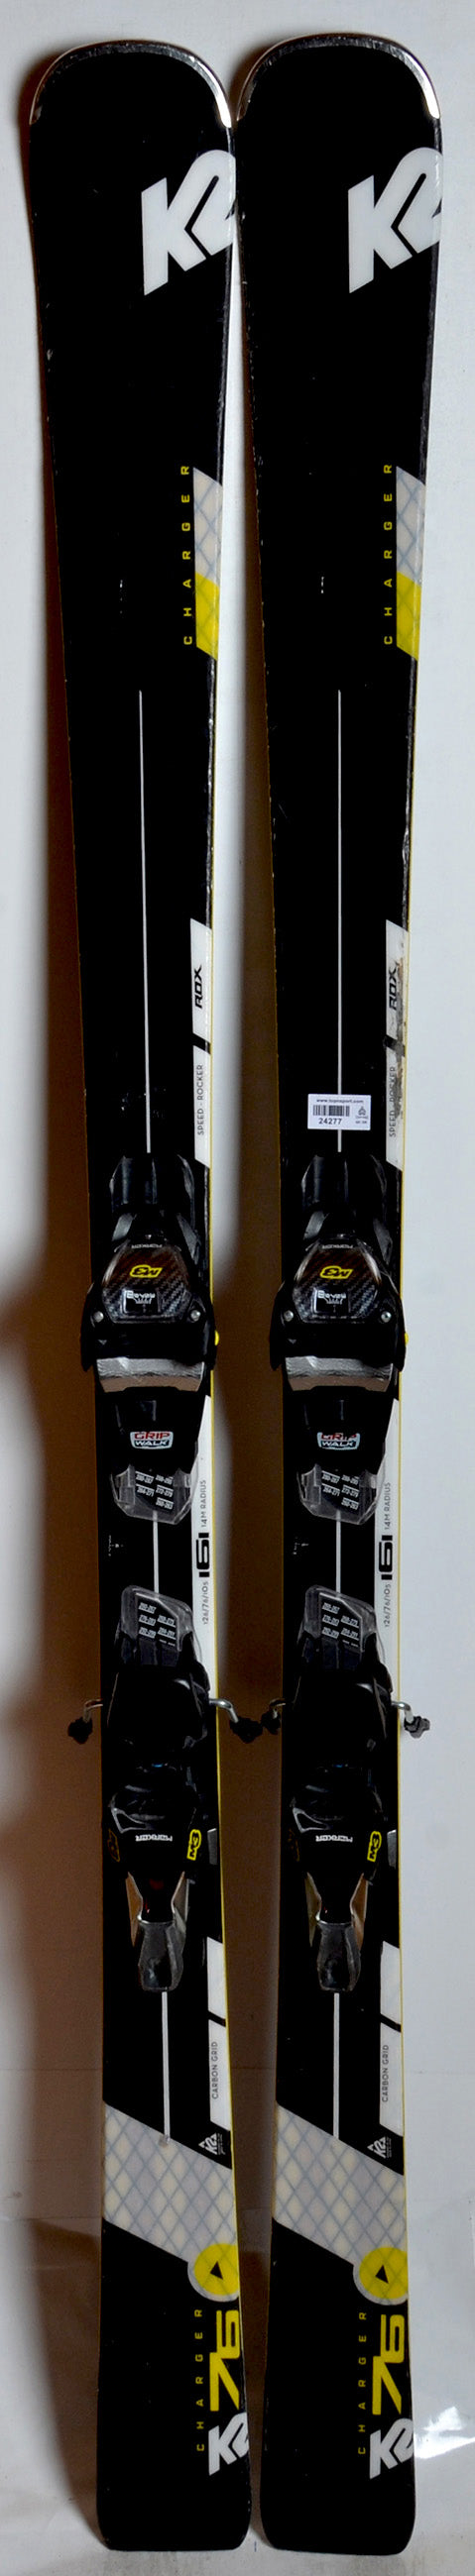 K2 CHARGER black - skis d'occasion